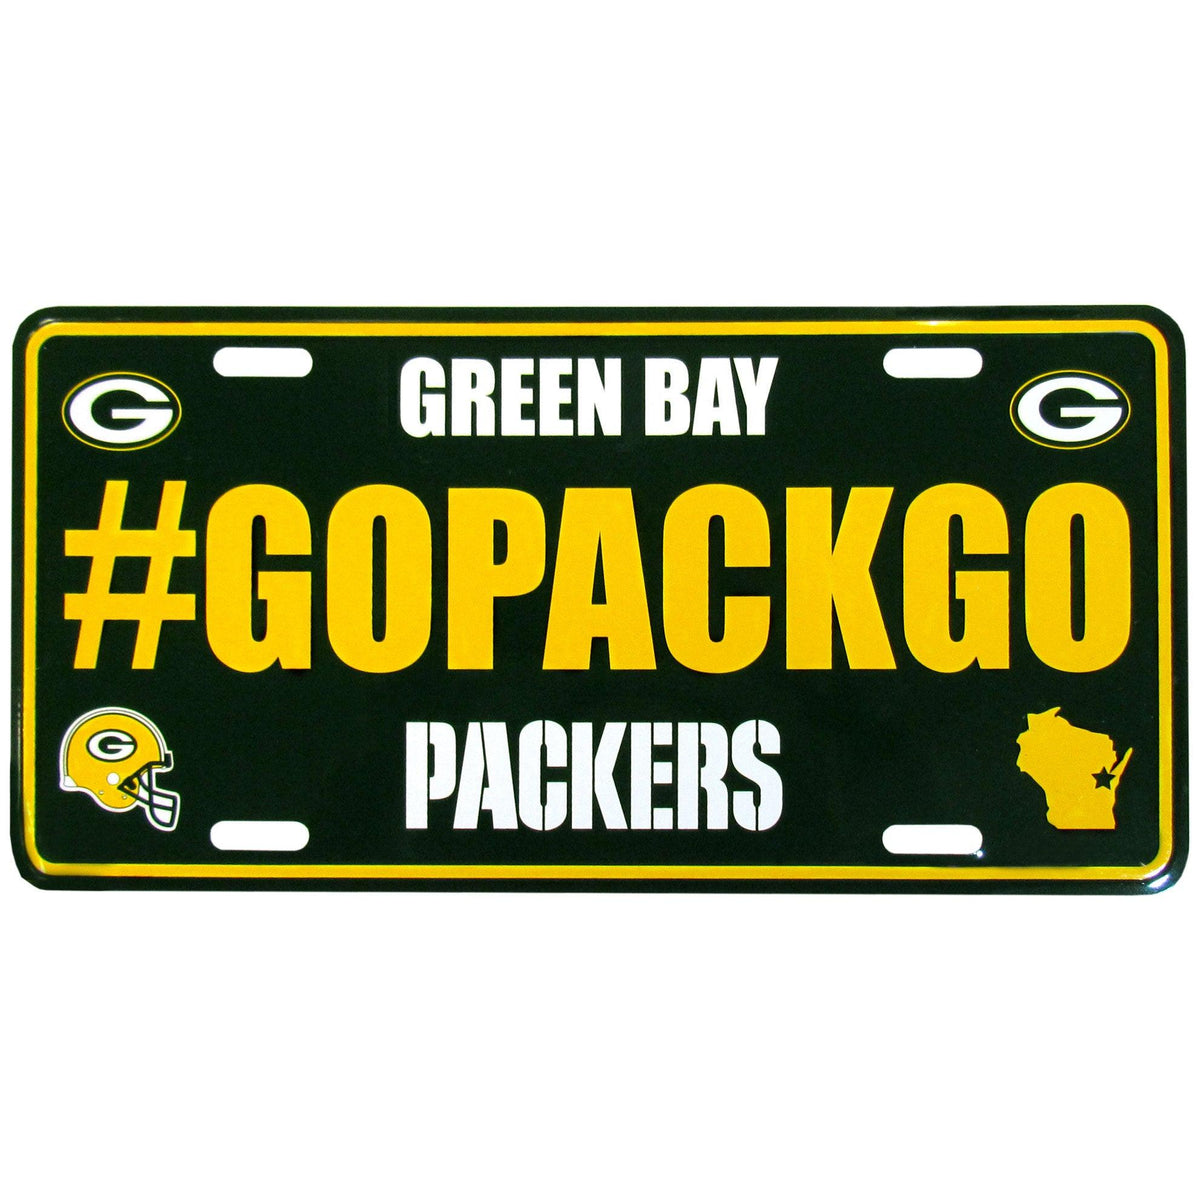 Green Bay Packers Hashtag License Plate - Flyclothing LLC